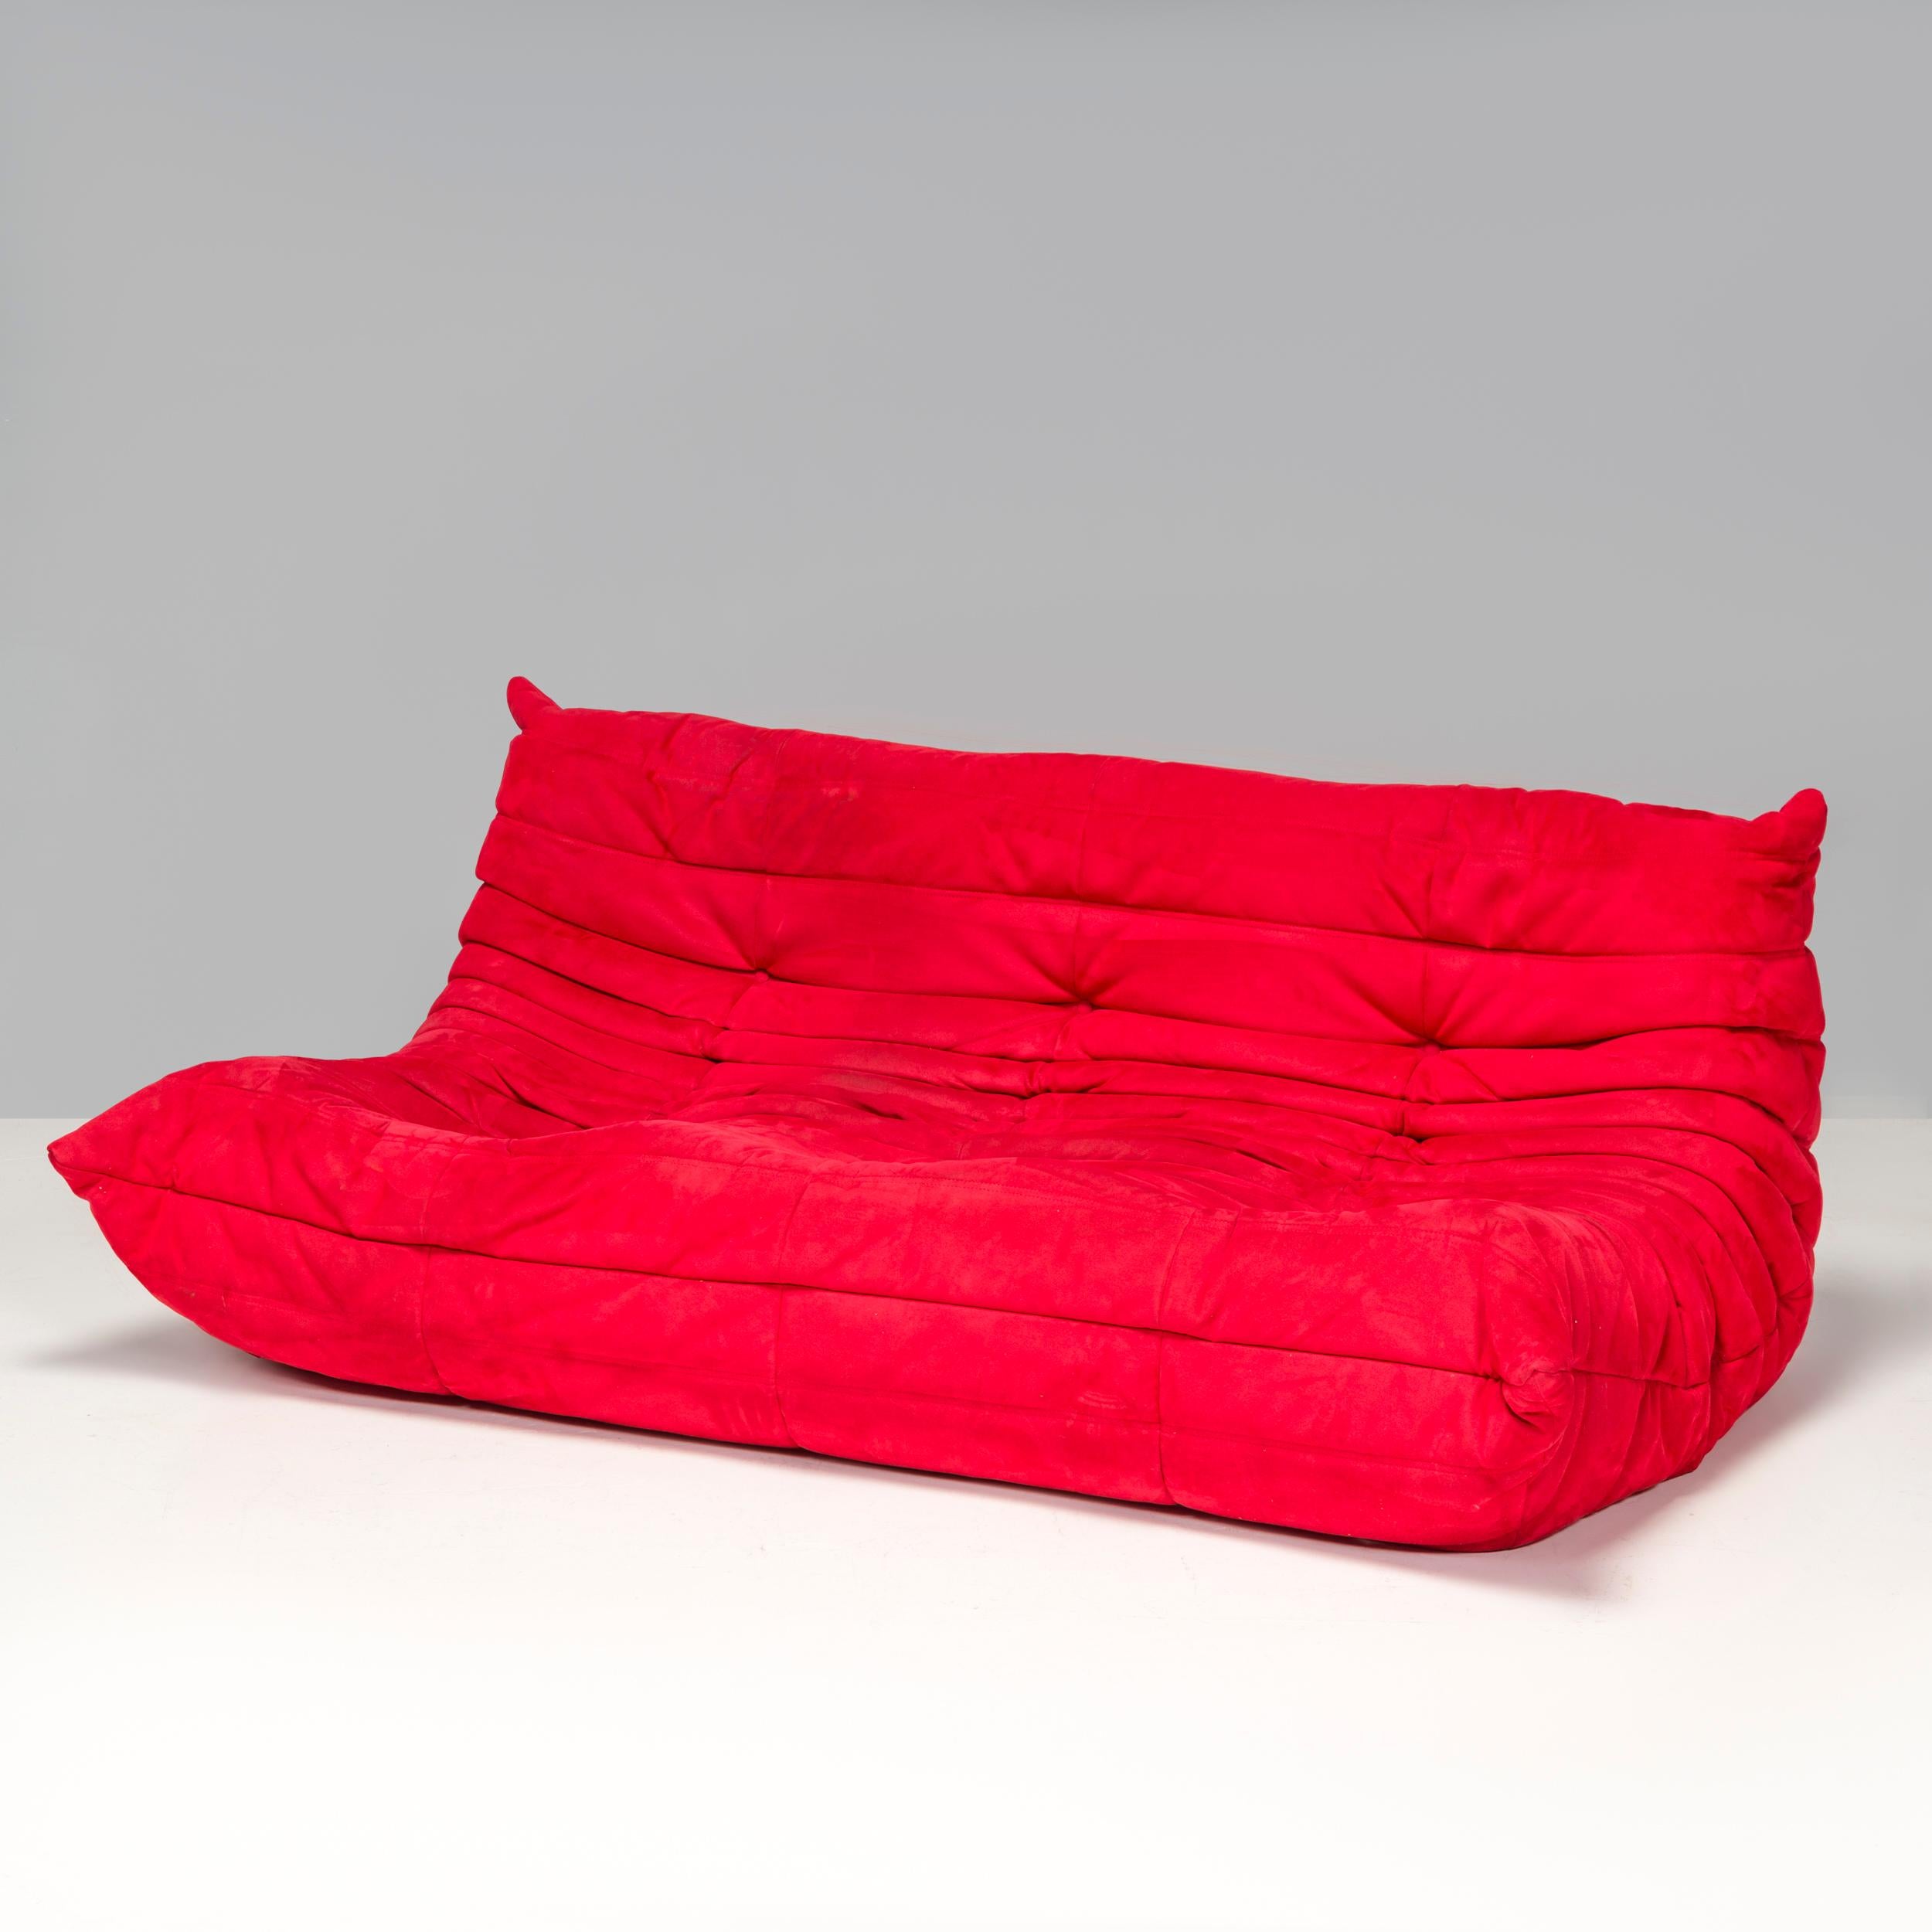 Fabric Ligne Roset by Michel Ducaroy Togo Red Alcantara Sectional Sofa, Set of 3 For Sale